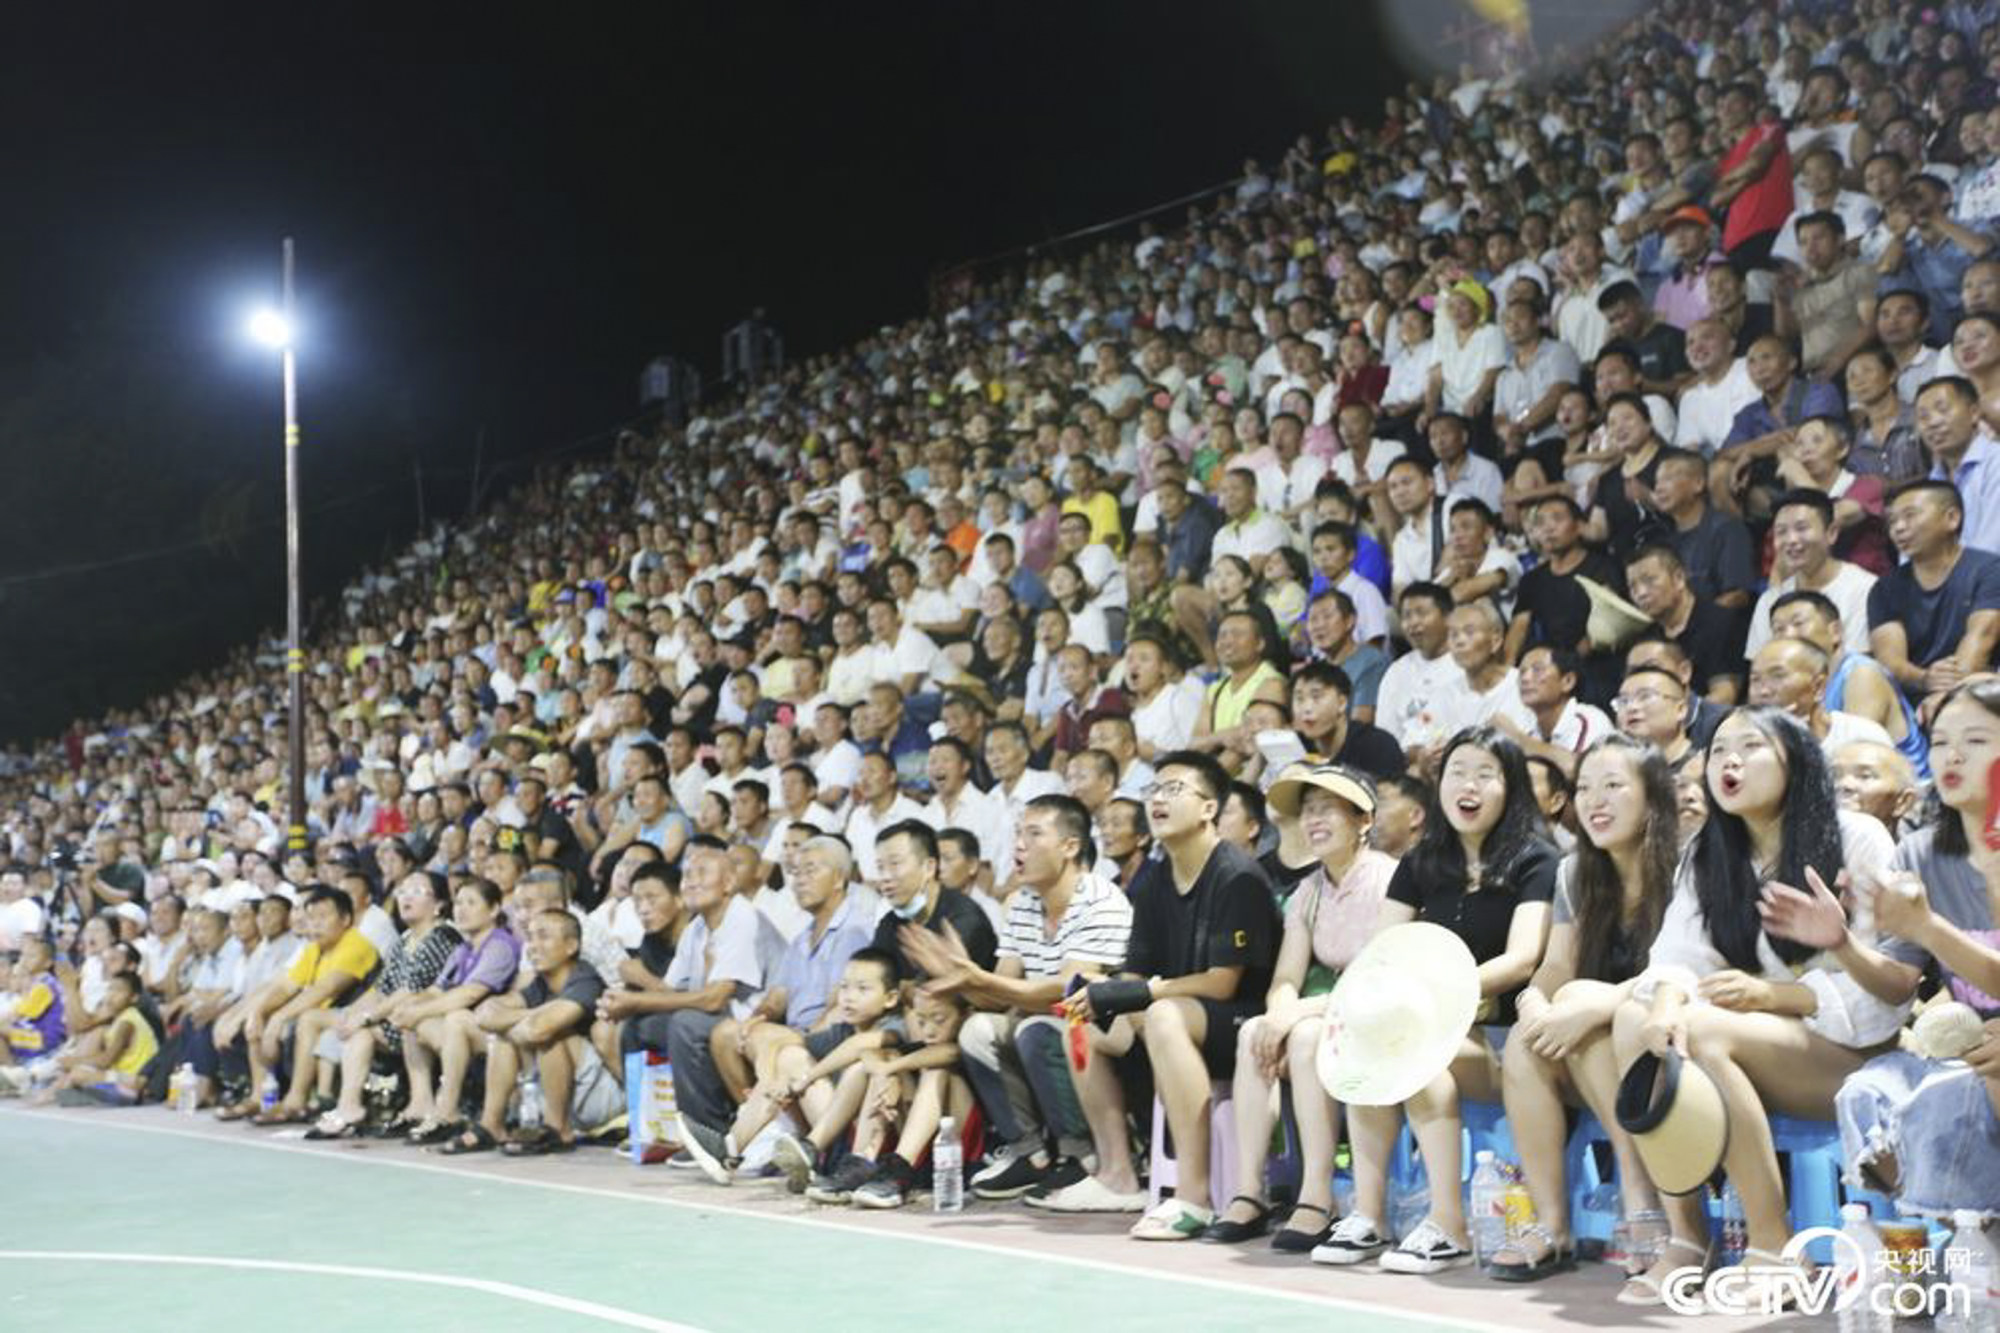 Crowds often will gather on nearby hills and rooftops when the spectator areas are filled. Photo: CCTV